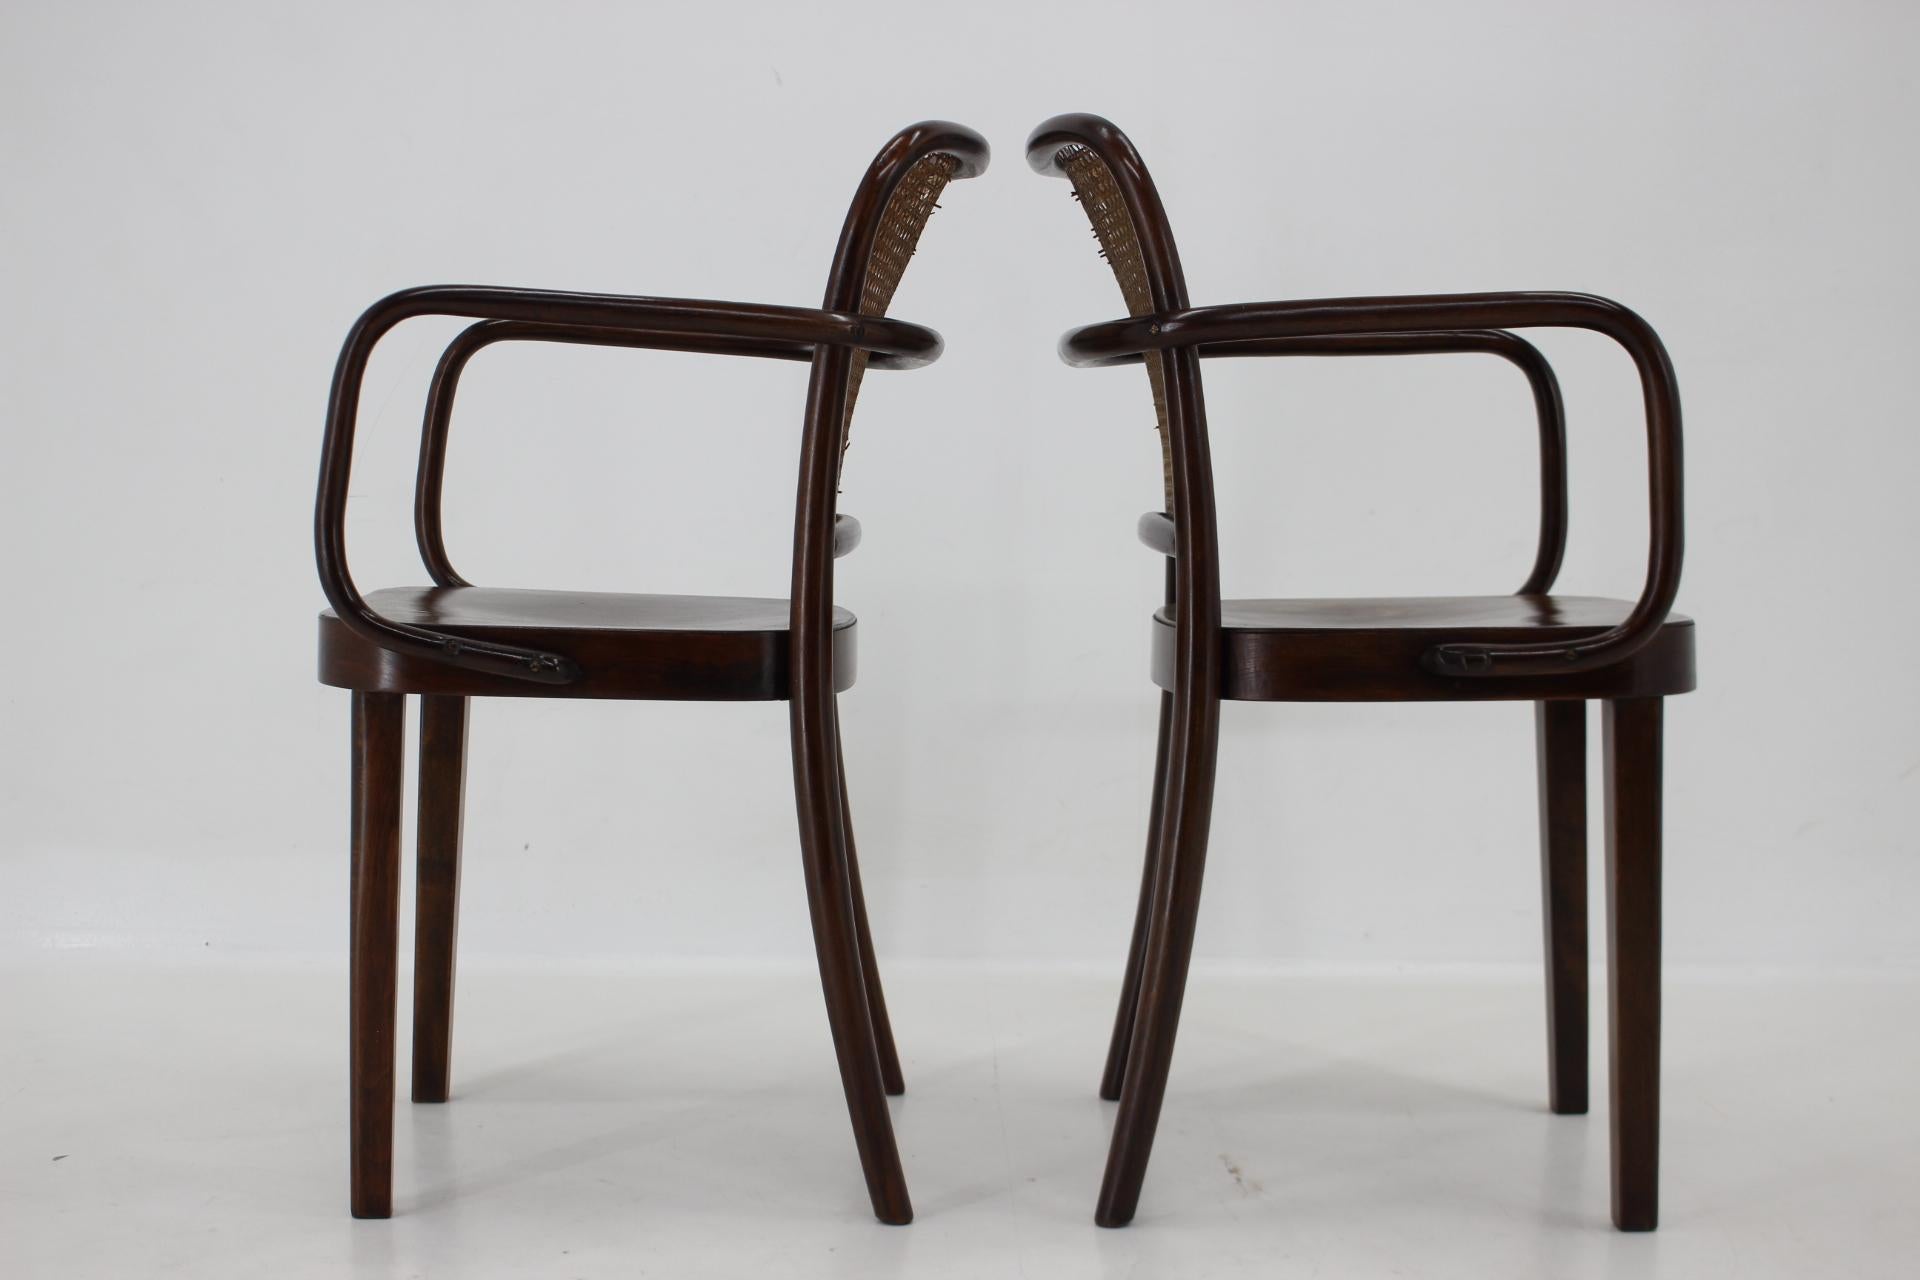 Early 20th Century 1920s Josef Hoffmann Bentwood Chairs, No. 811 for Thonet, Czechoslovakia For Sale